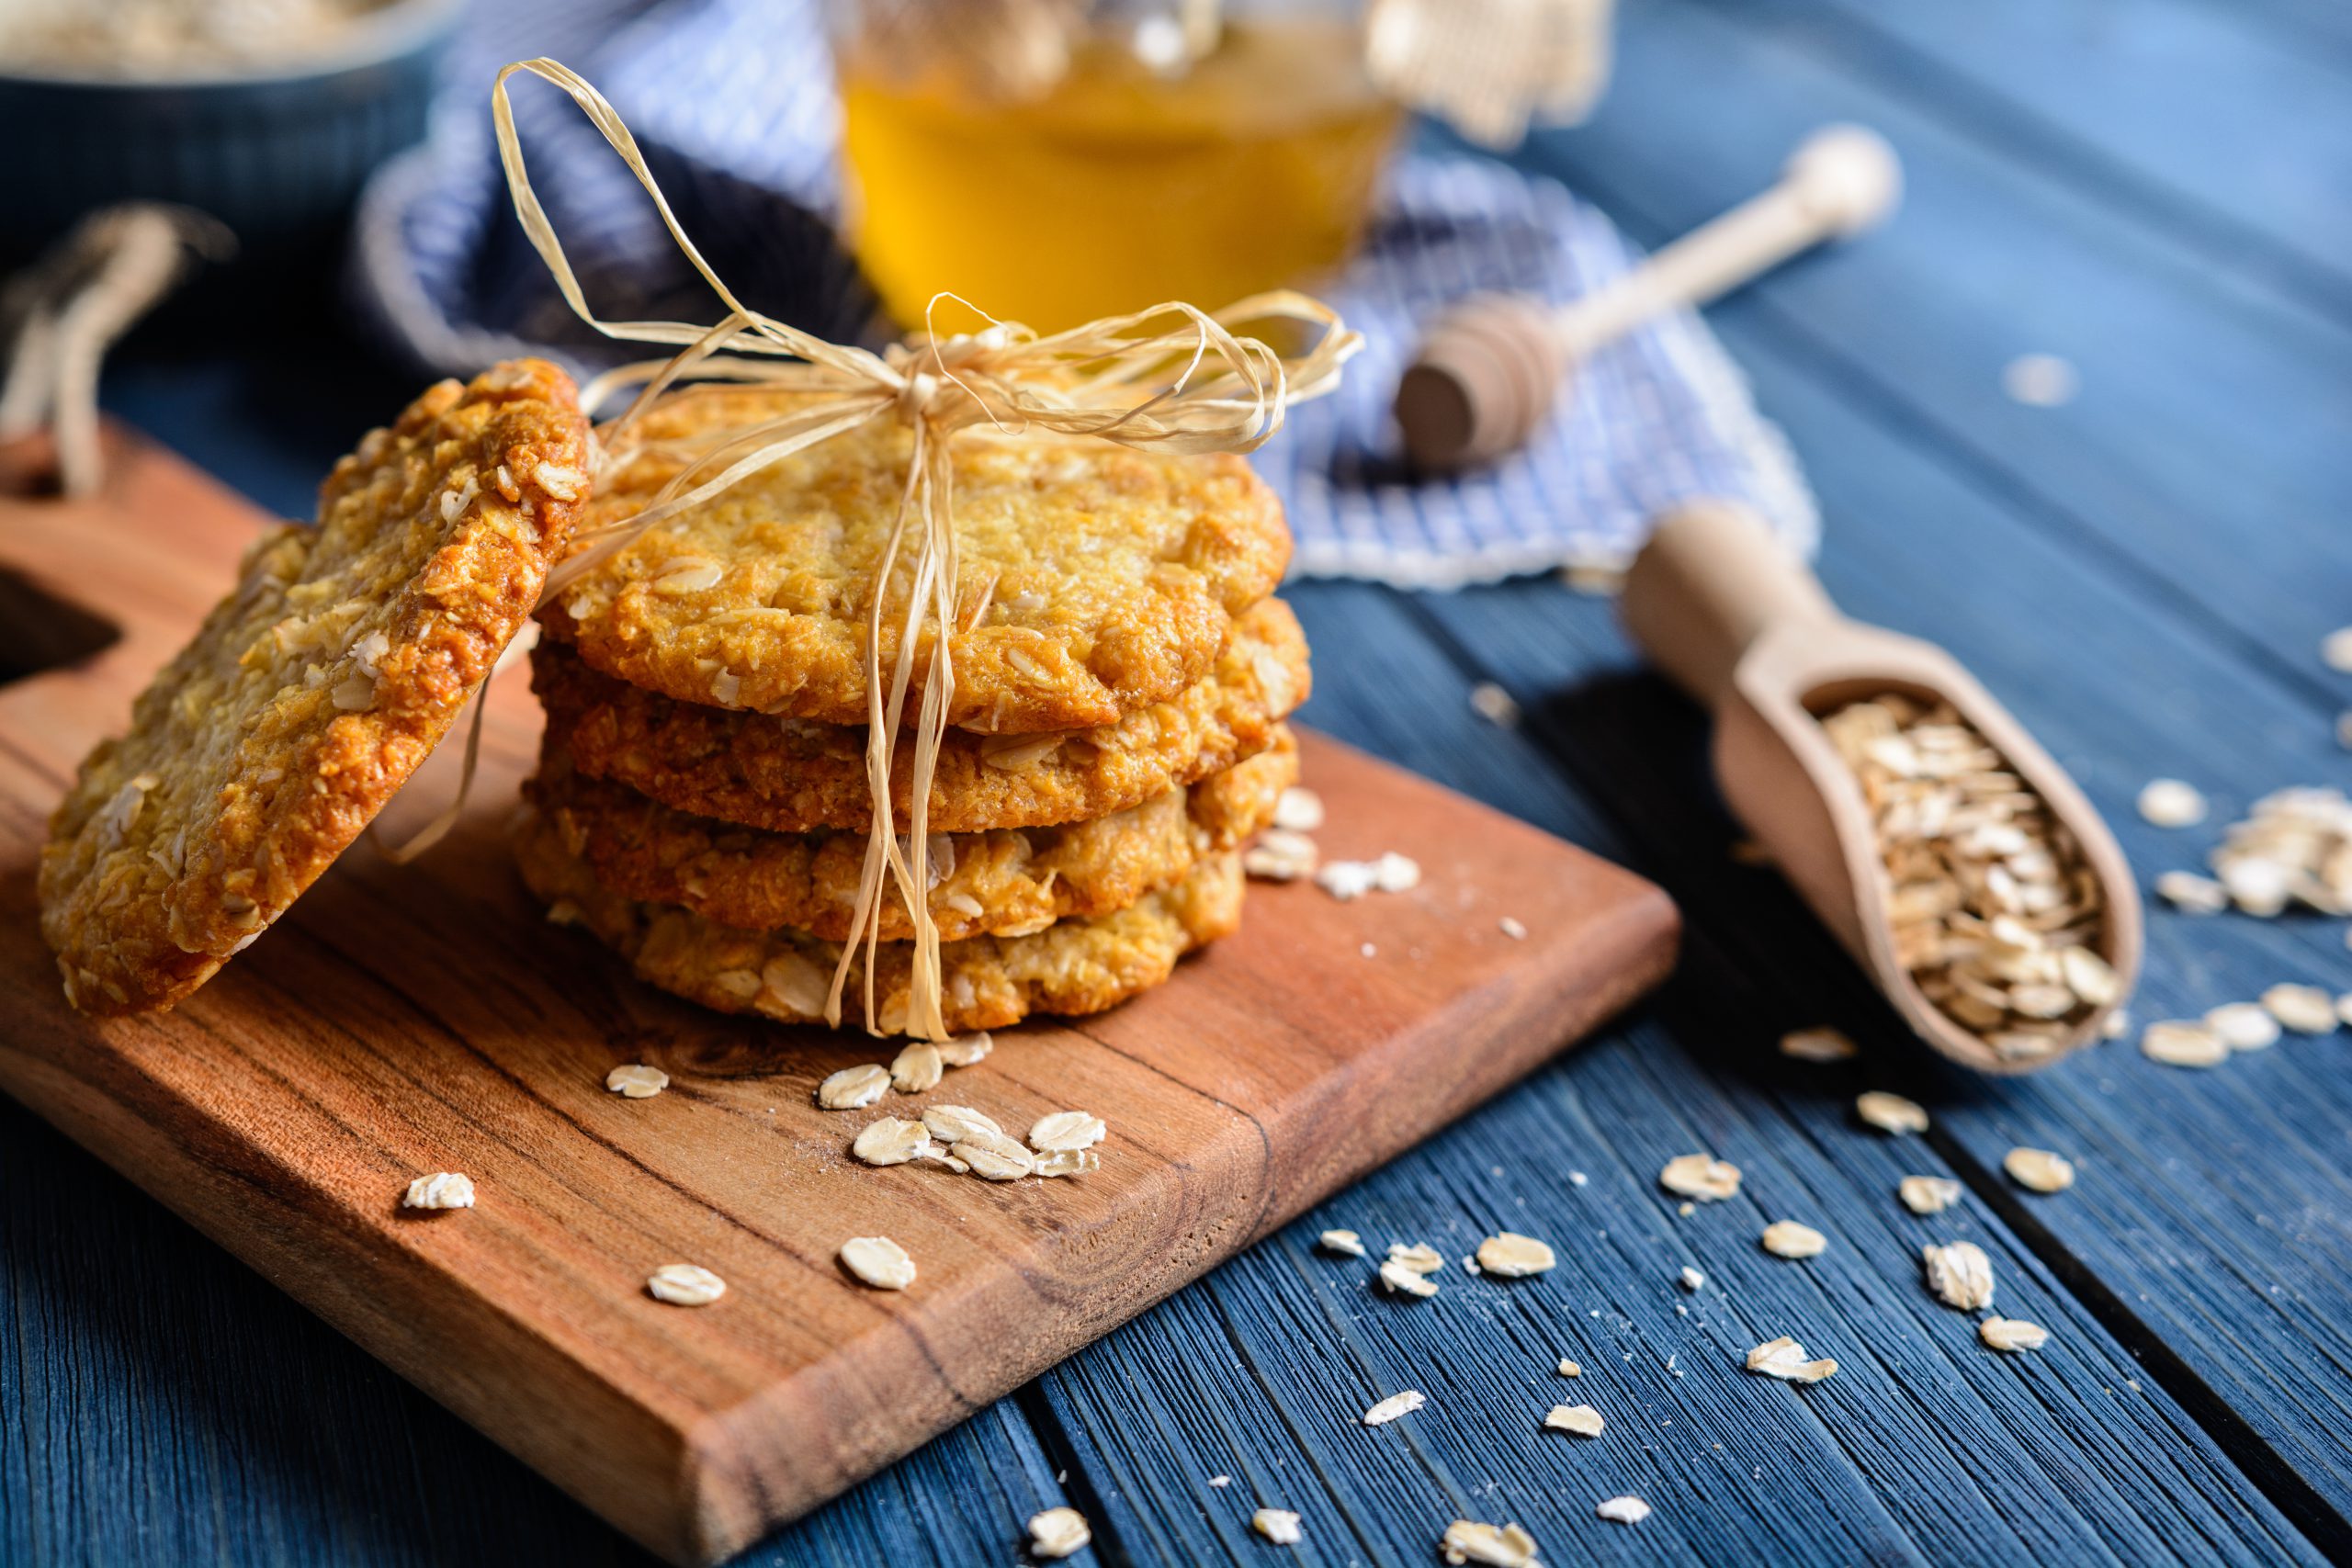 How to make Anzac Biscuits - by P&O chef